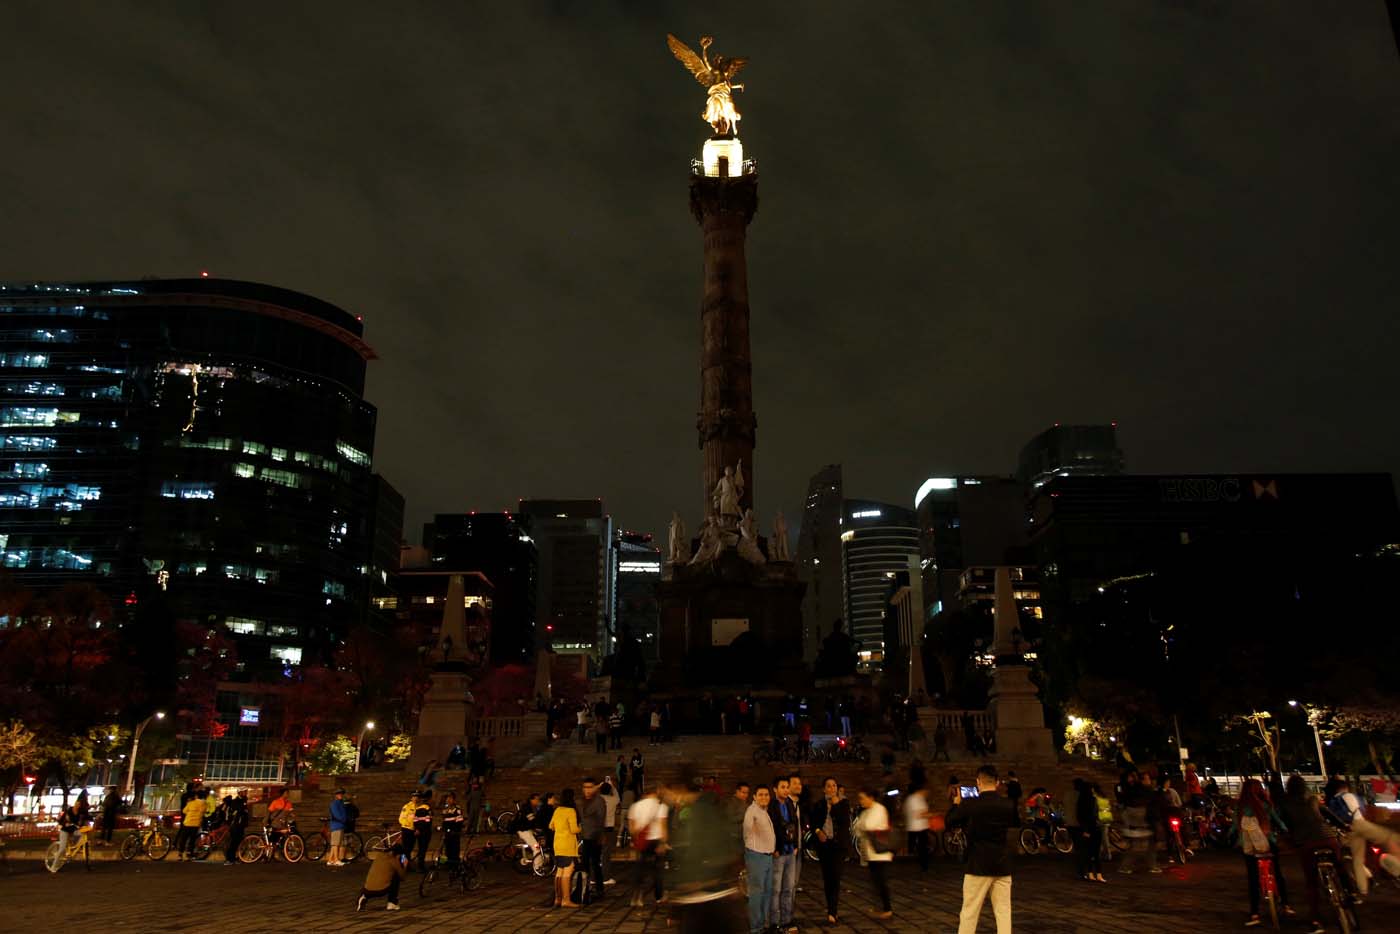 People stand by "Angel de la Independencia" monument after the lights were turned off for Earth Hour in Mexico City, Mexico, March 25, 2017. REUTERS/Ginnette Riquelme